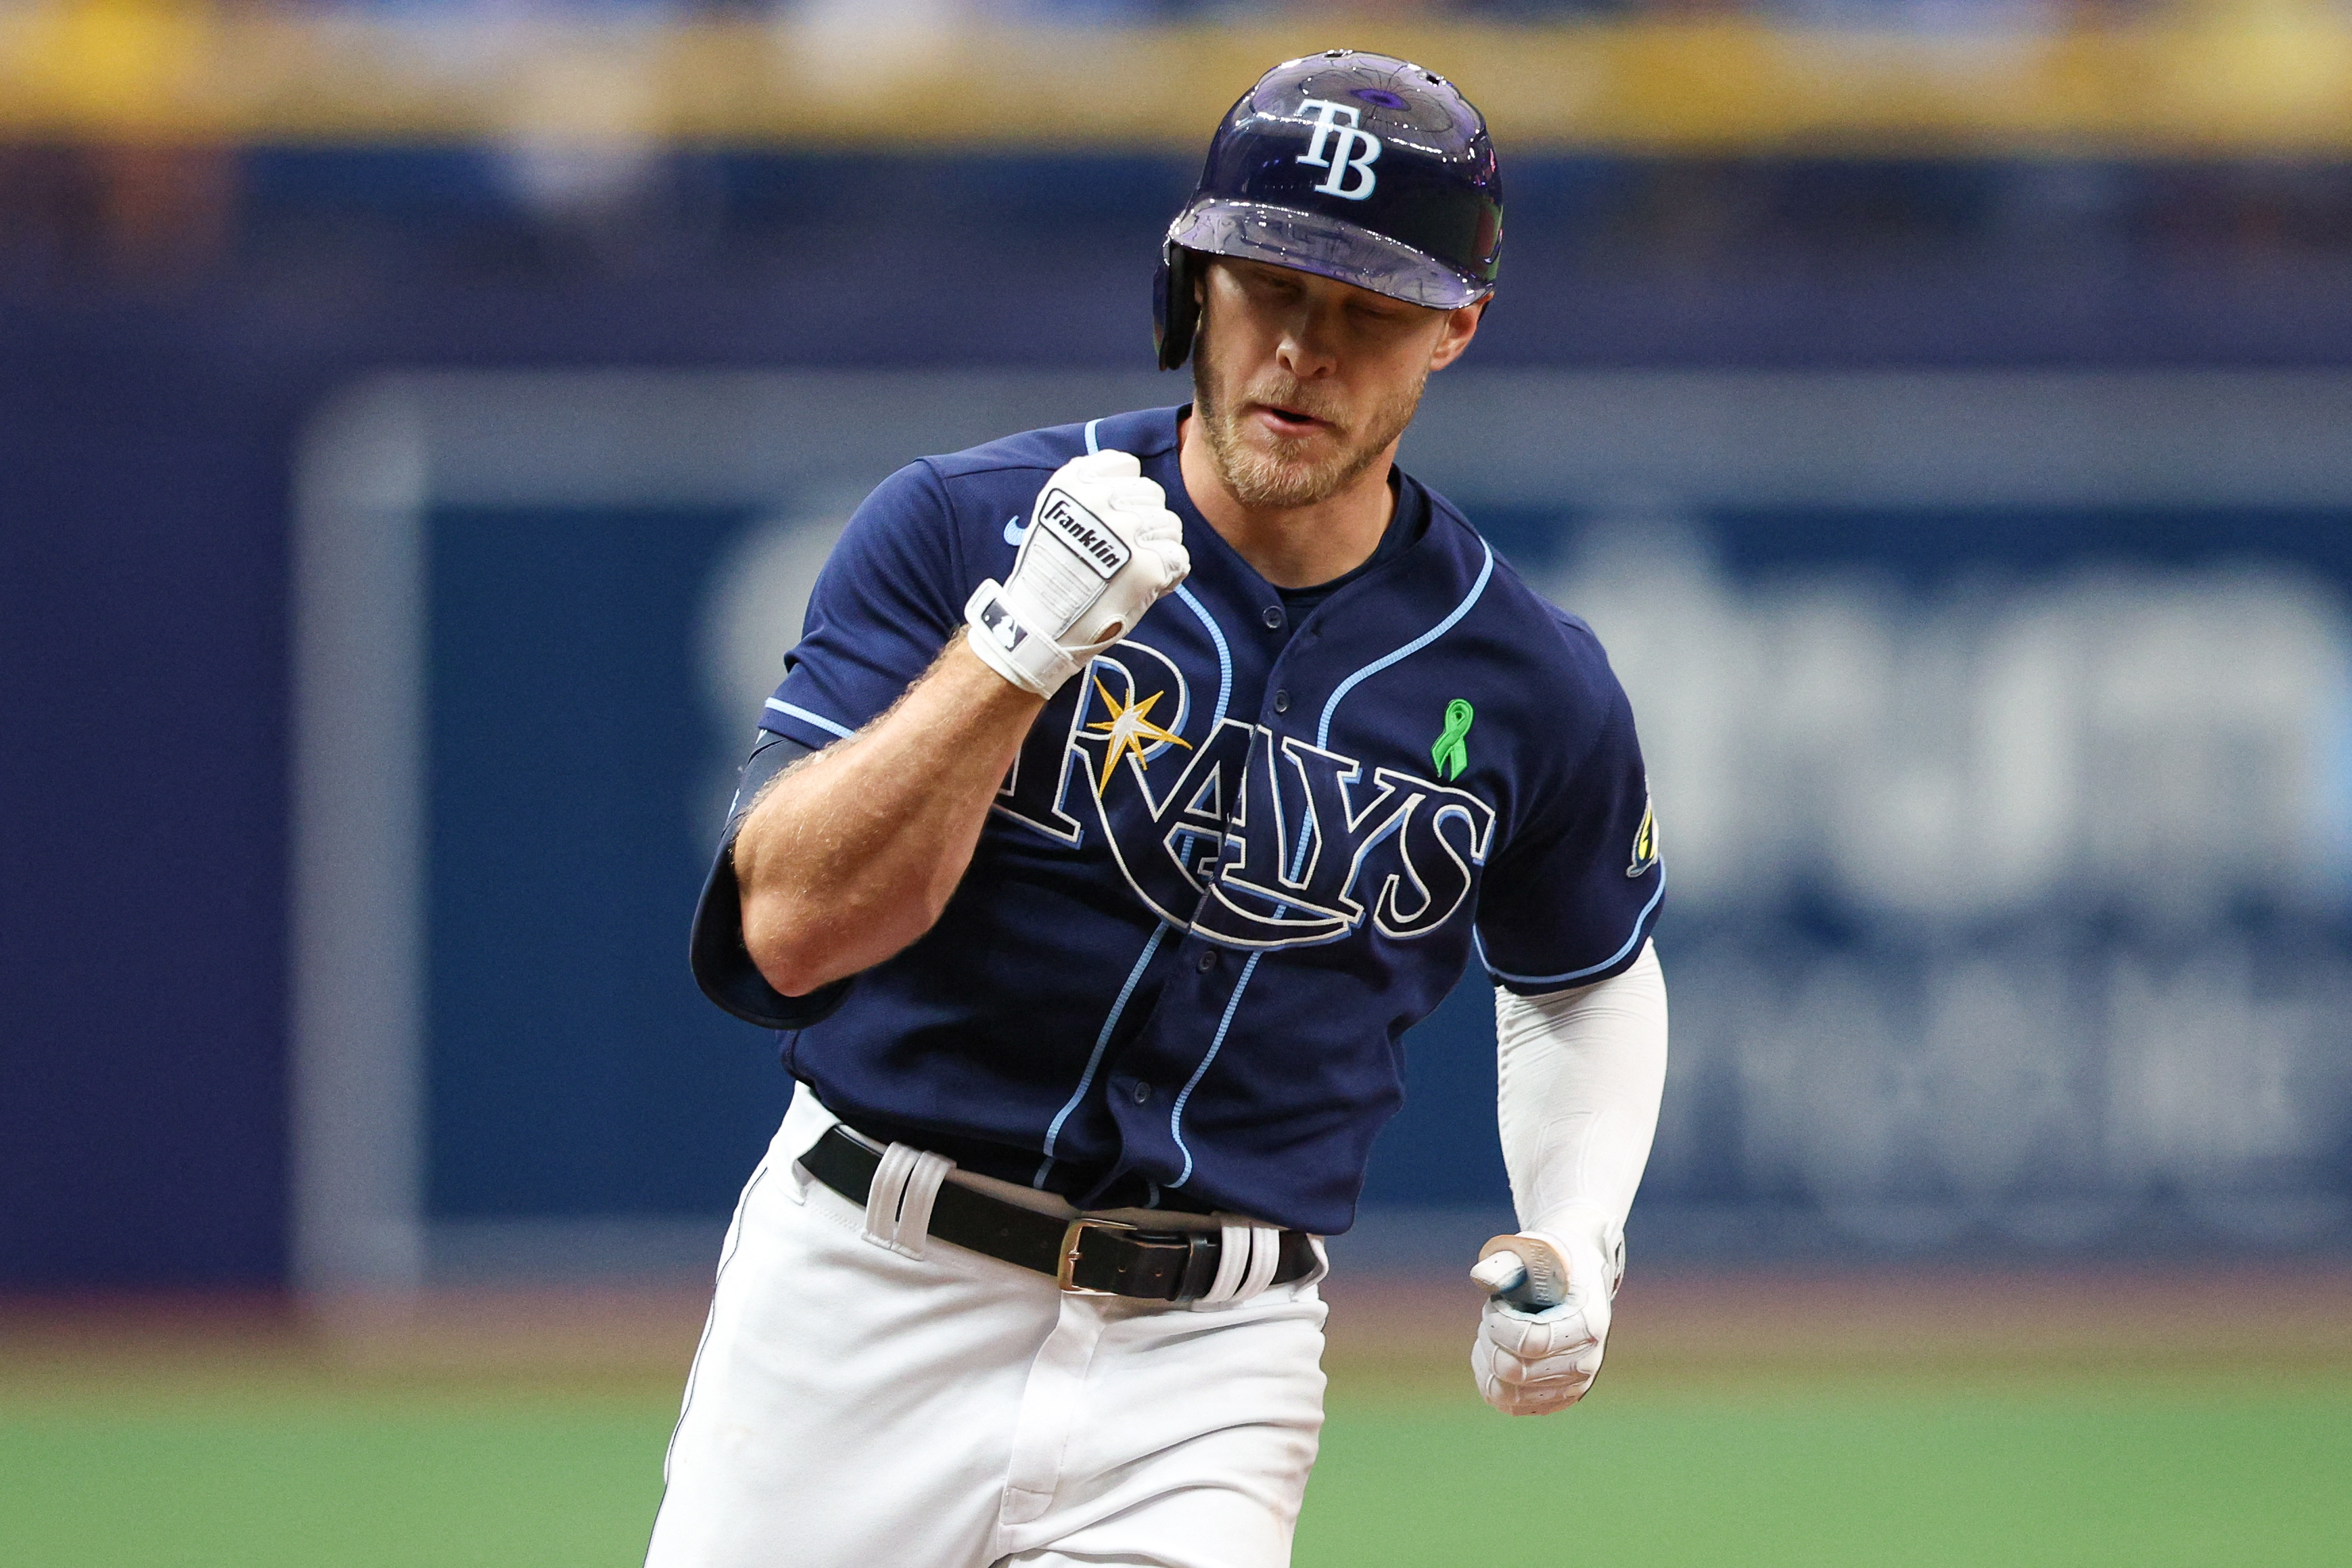 Rays sweep Pirates as Eflin throws 7 masterful innings